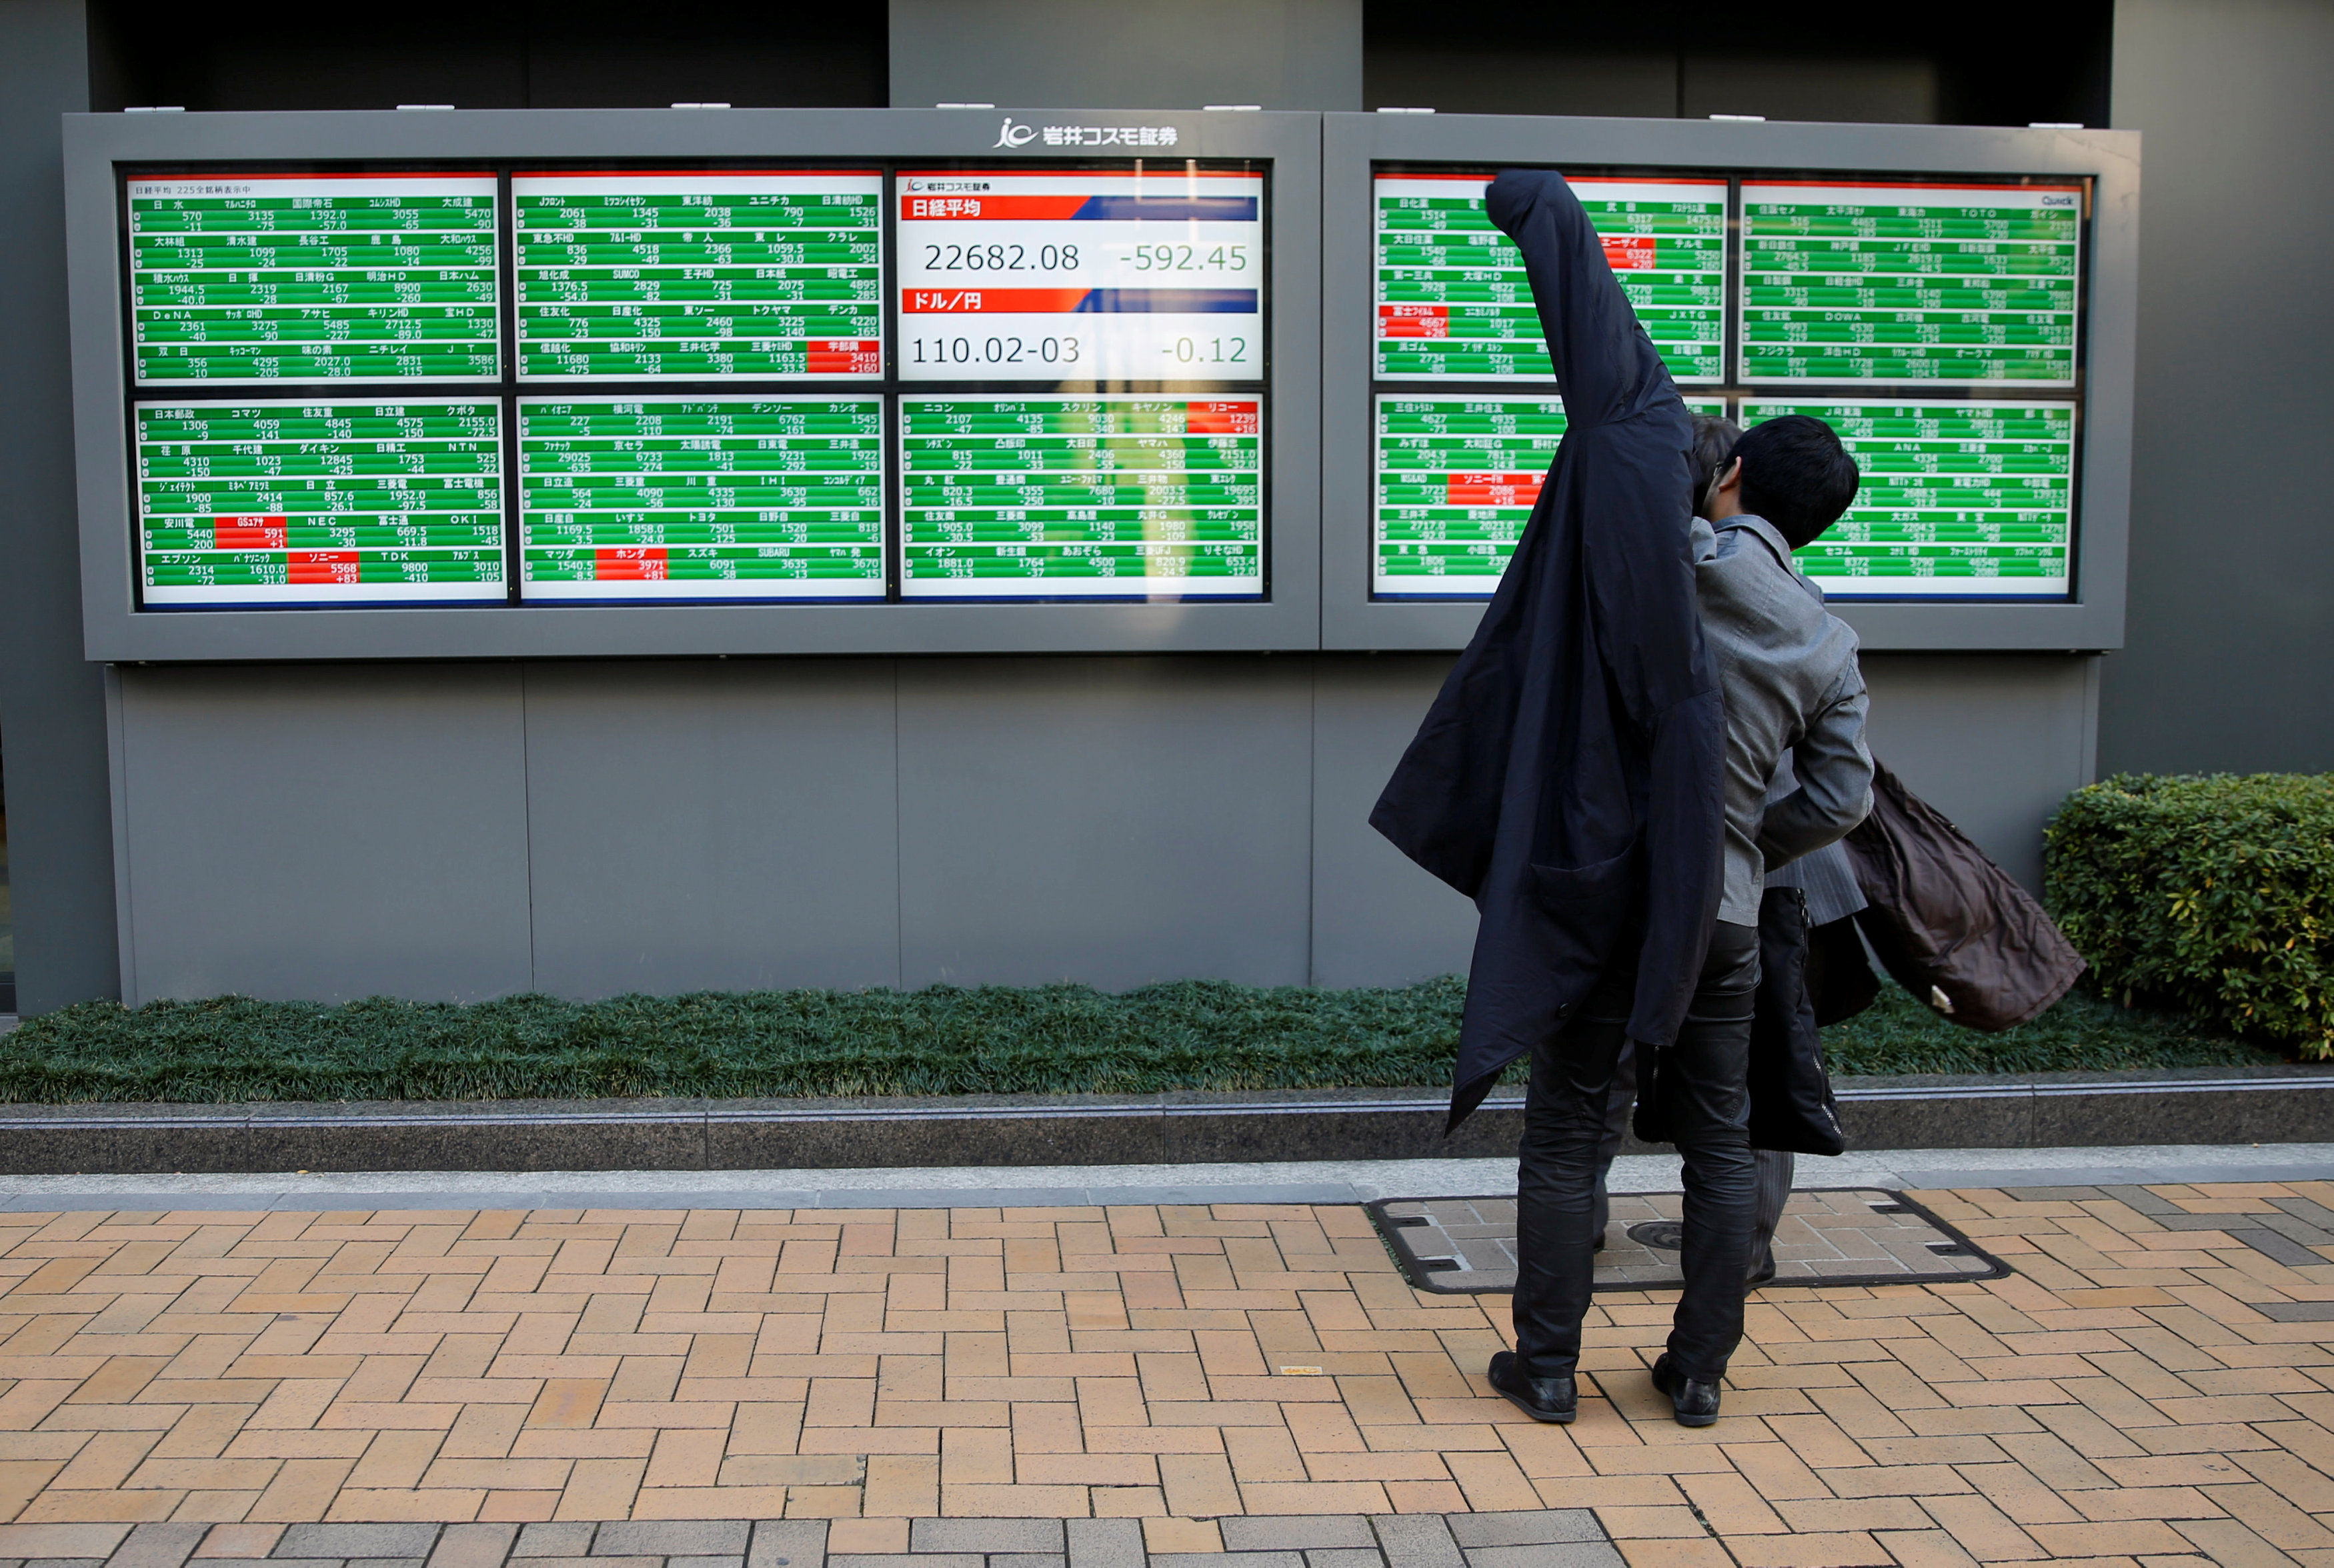 Asian shares rise as upbeat US jobs data offsets trade worries